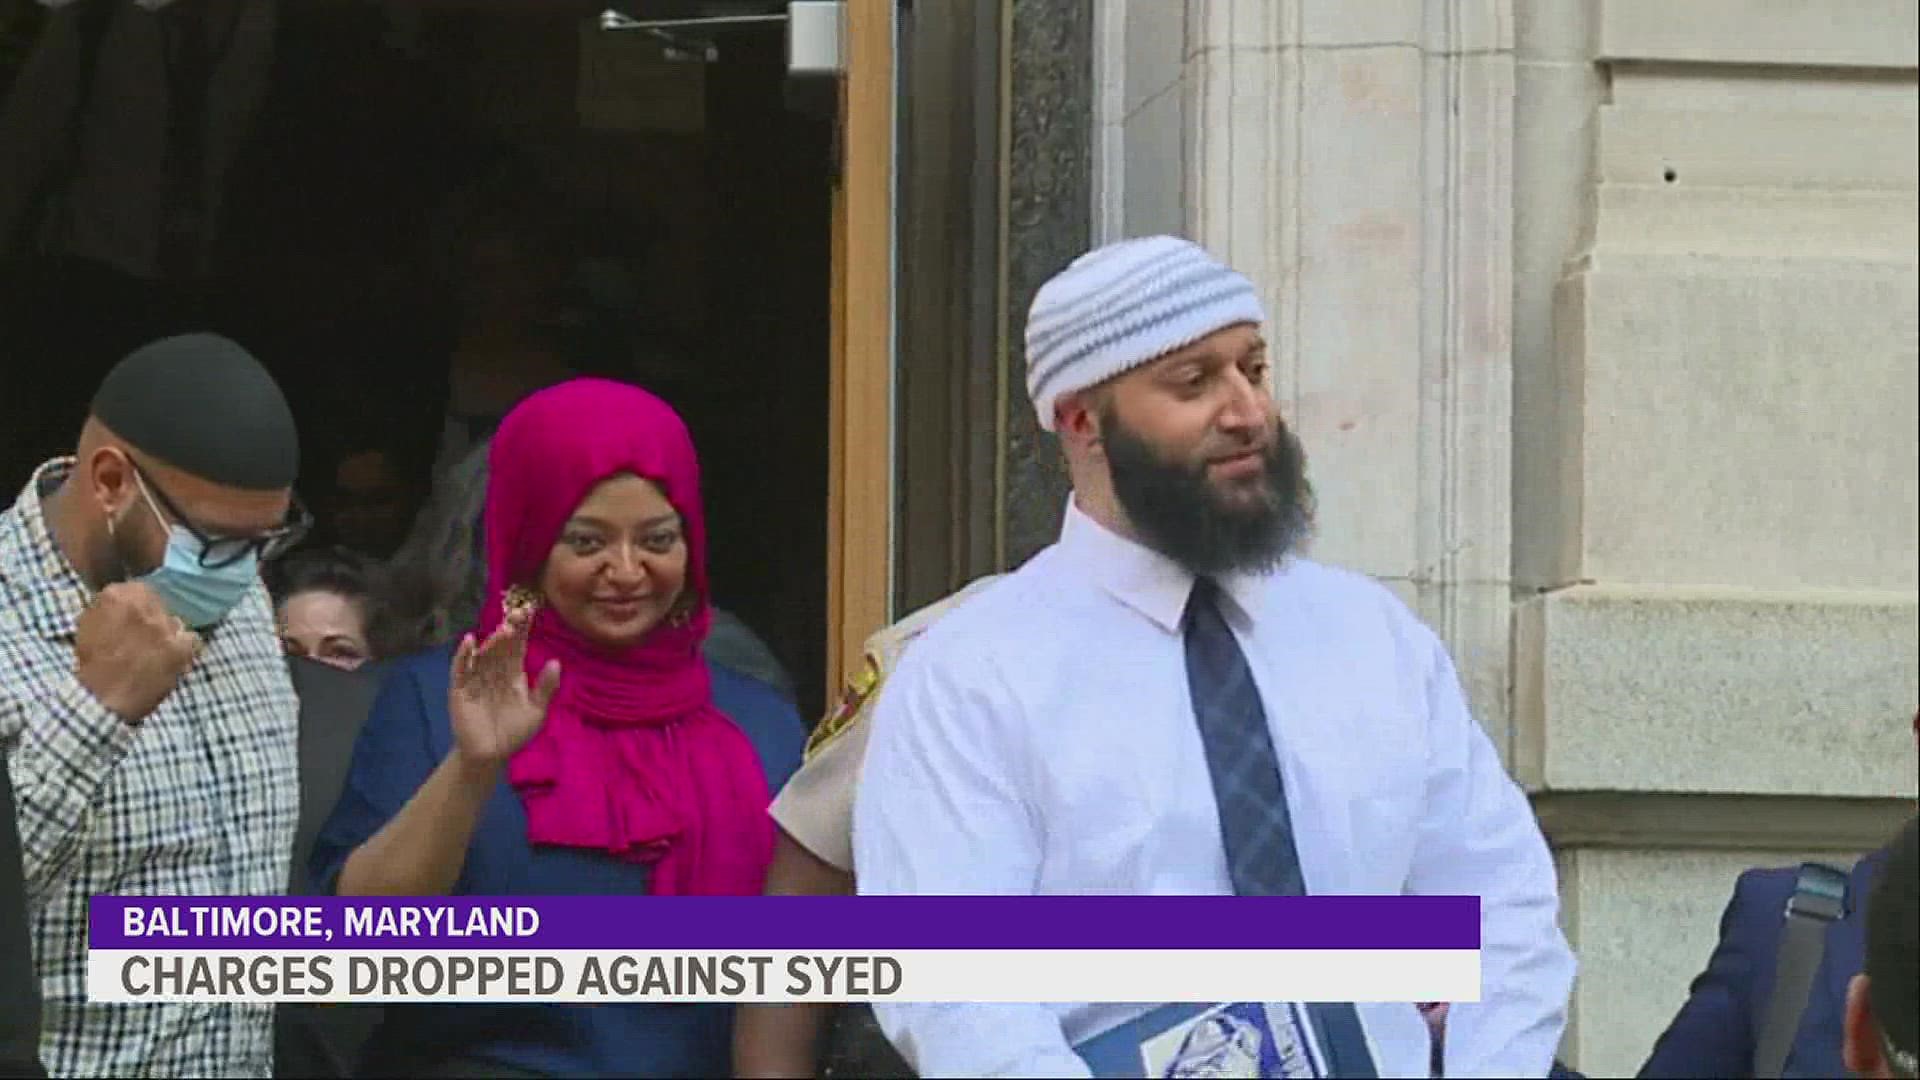 The Maryland Office of the Public Defender says the announcement to drop the charges is based on DNA testing results that excluded Adnan Syed.